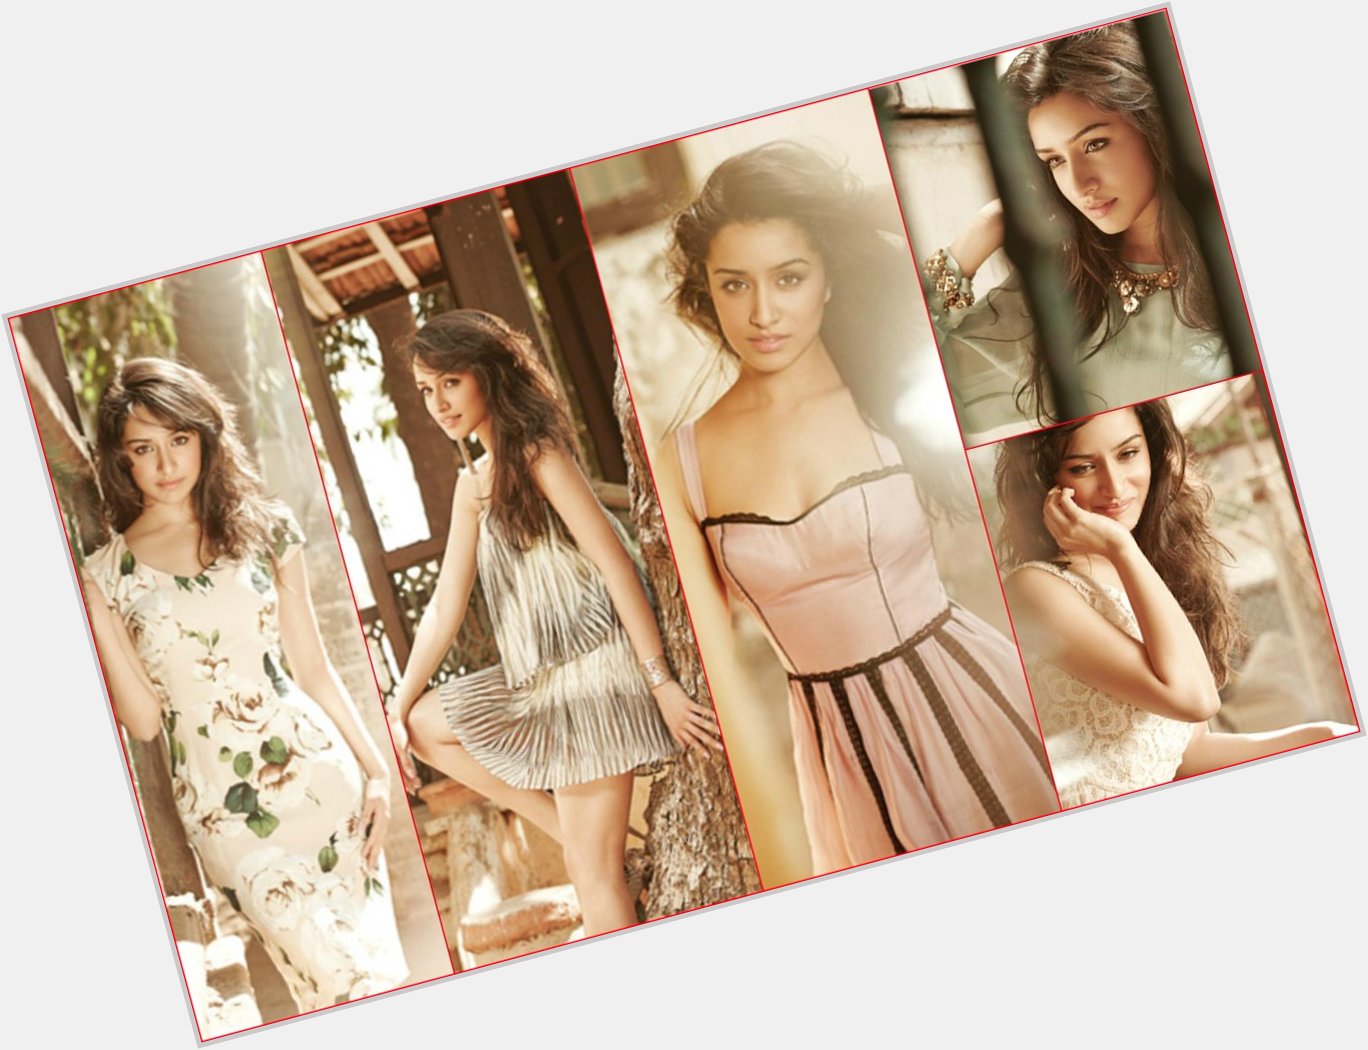 Happy Birthday Shraddha Kapoor A pic collage from photoshoot. 